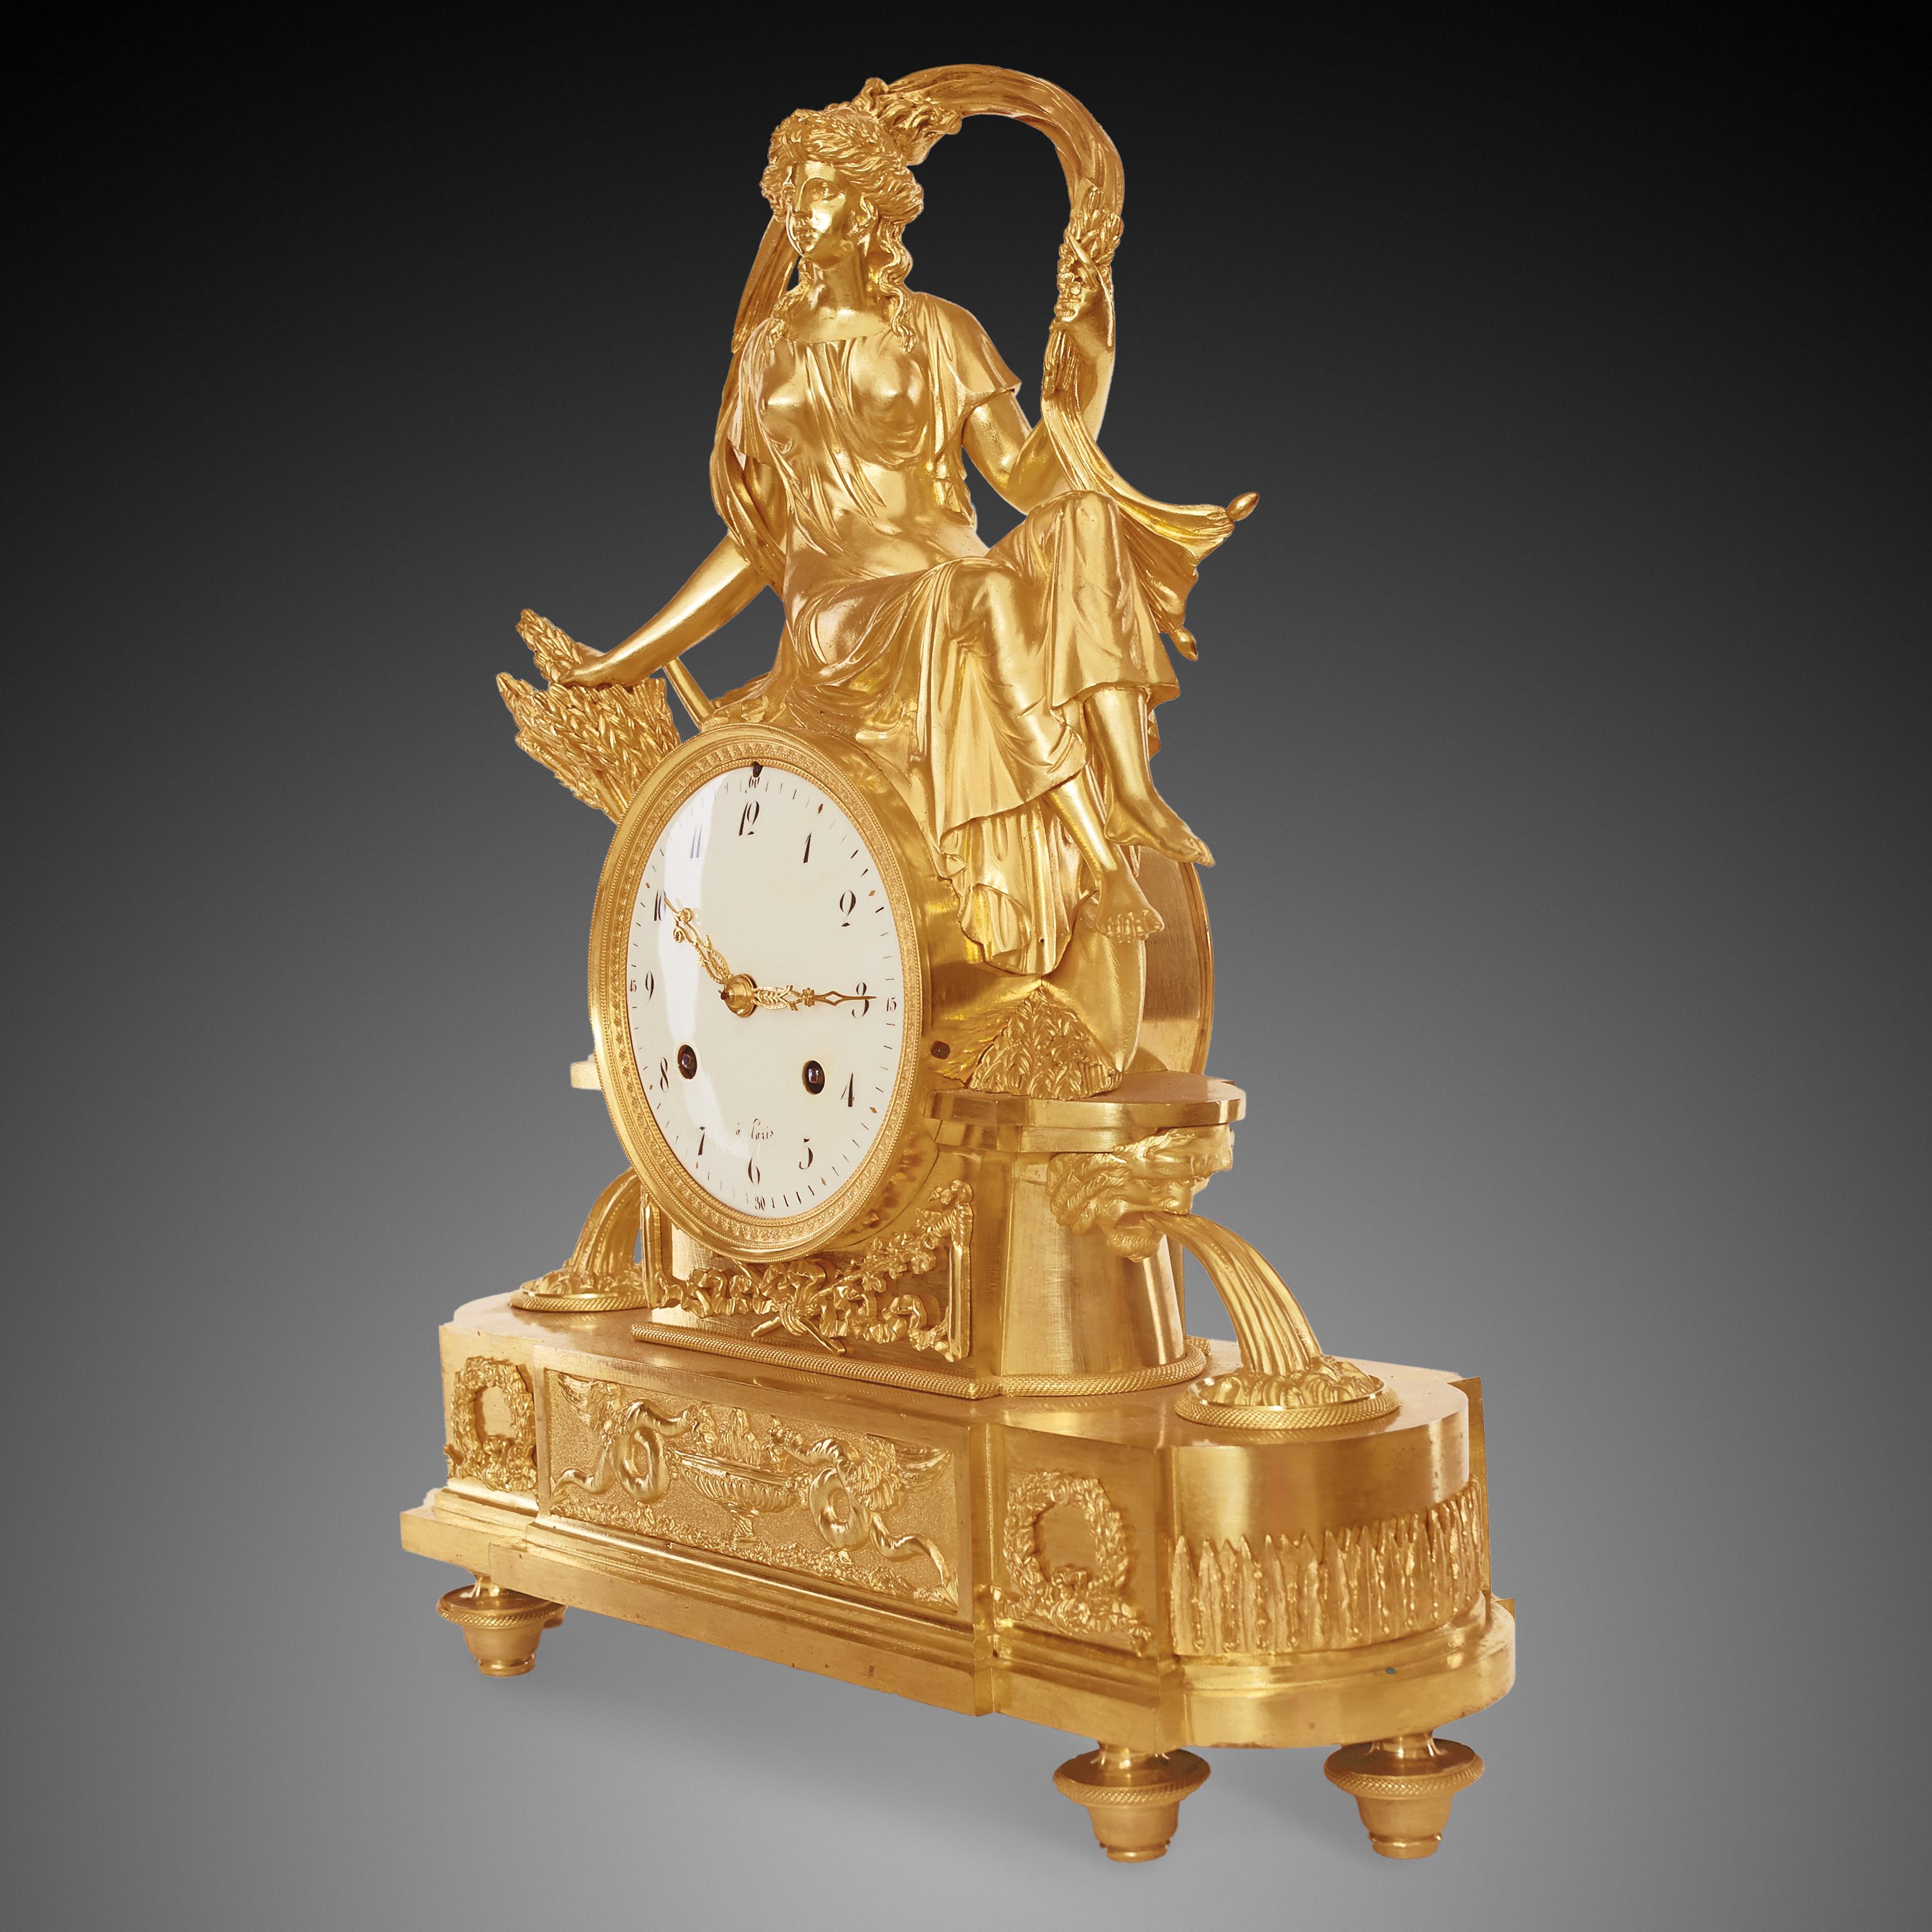 Empire clock signed à Paris 

The mantel clock is in gilded bronze representing Ceres as a goddess of fertility, agriculture, grain crops and motherly relationships. In ancient Rome she was worshipped by people in order to provide her favor in the